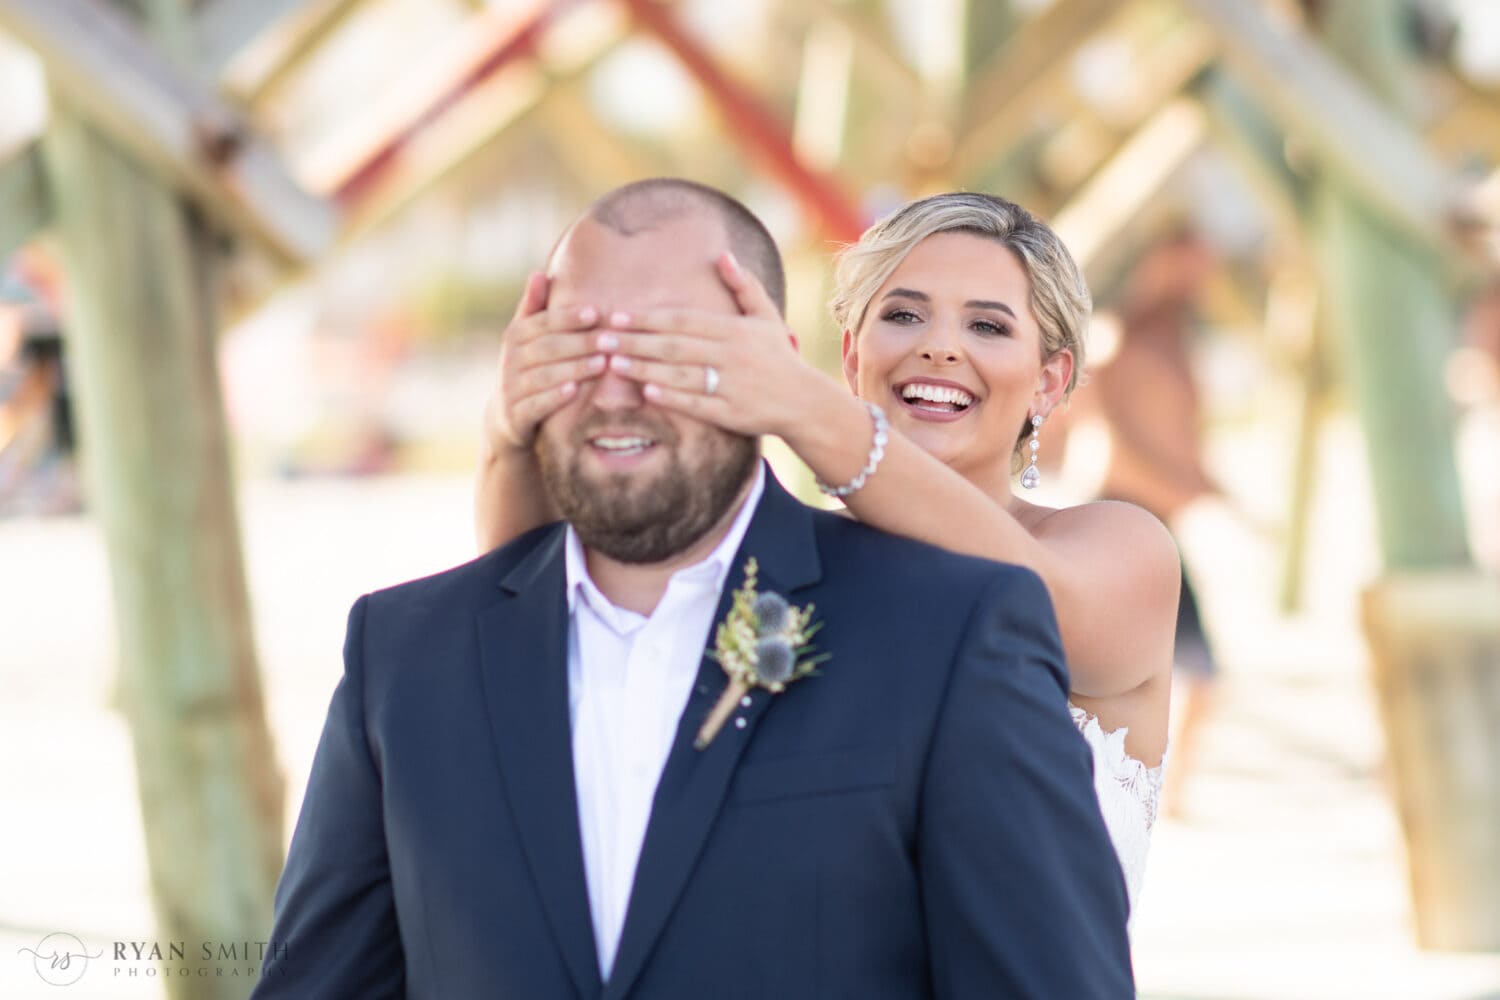 First look with bride putting her hands around the groom's eyes - Folly Beach - Charleston